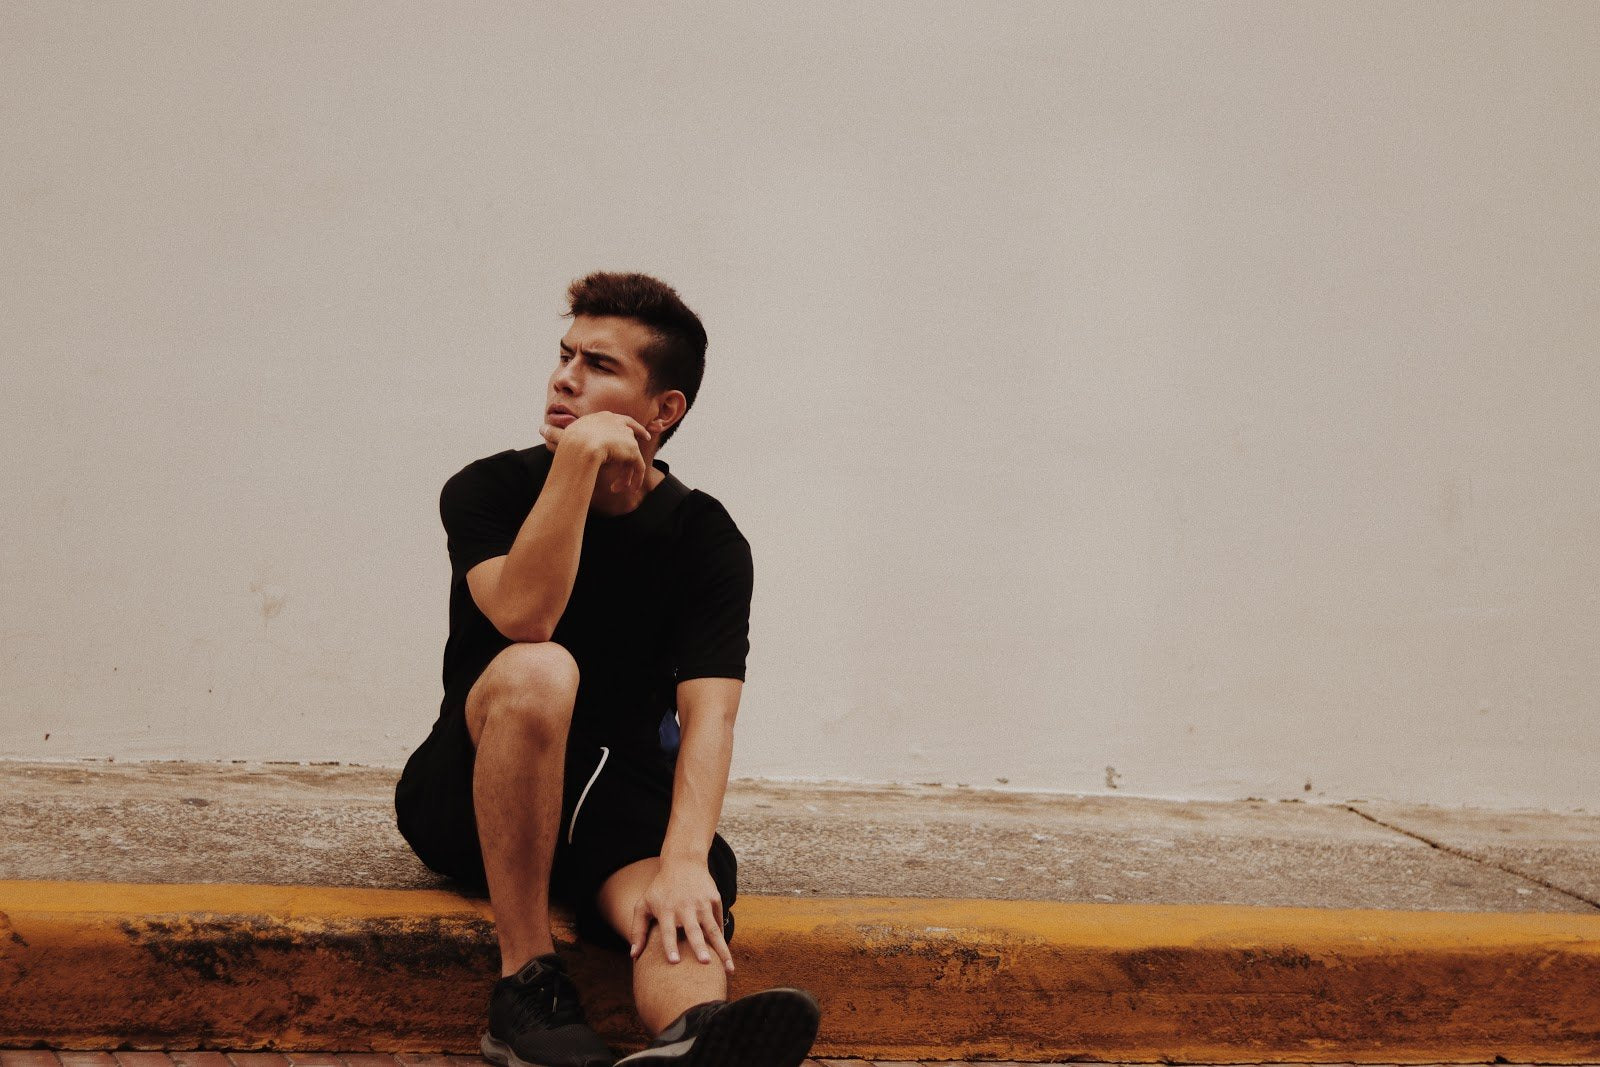 photo-of-man-with-hand-on-chin-sitting-on-concrete-pavement